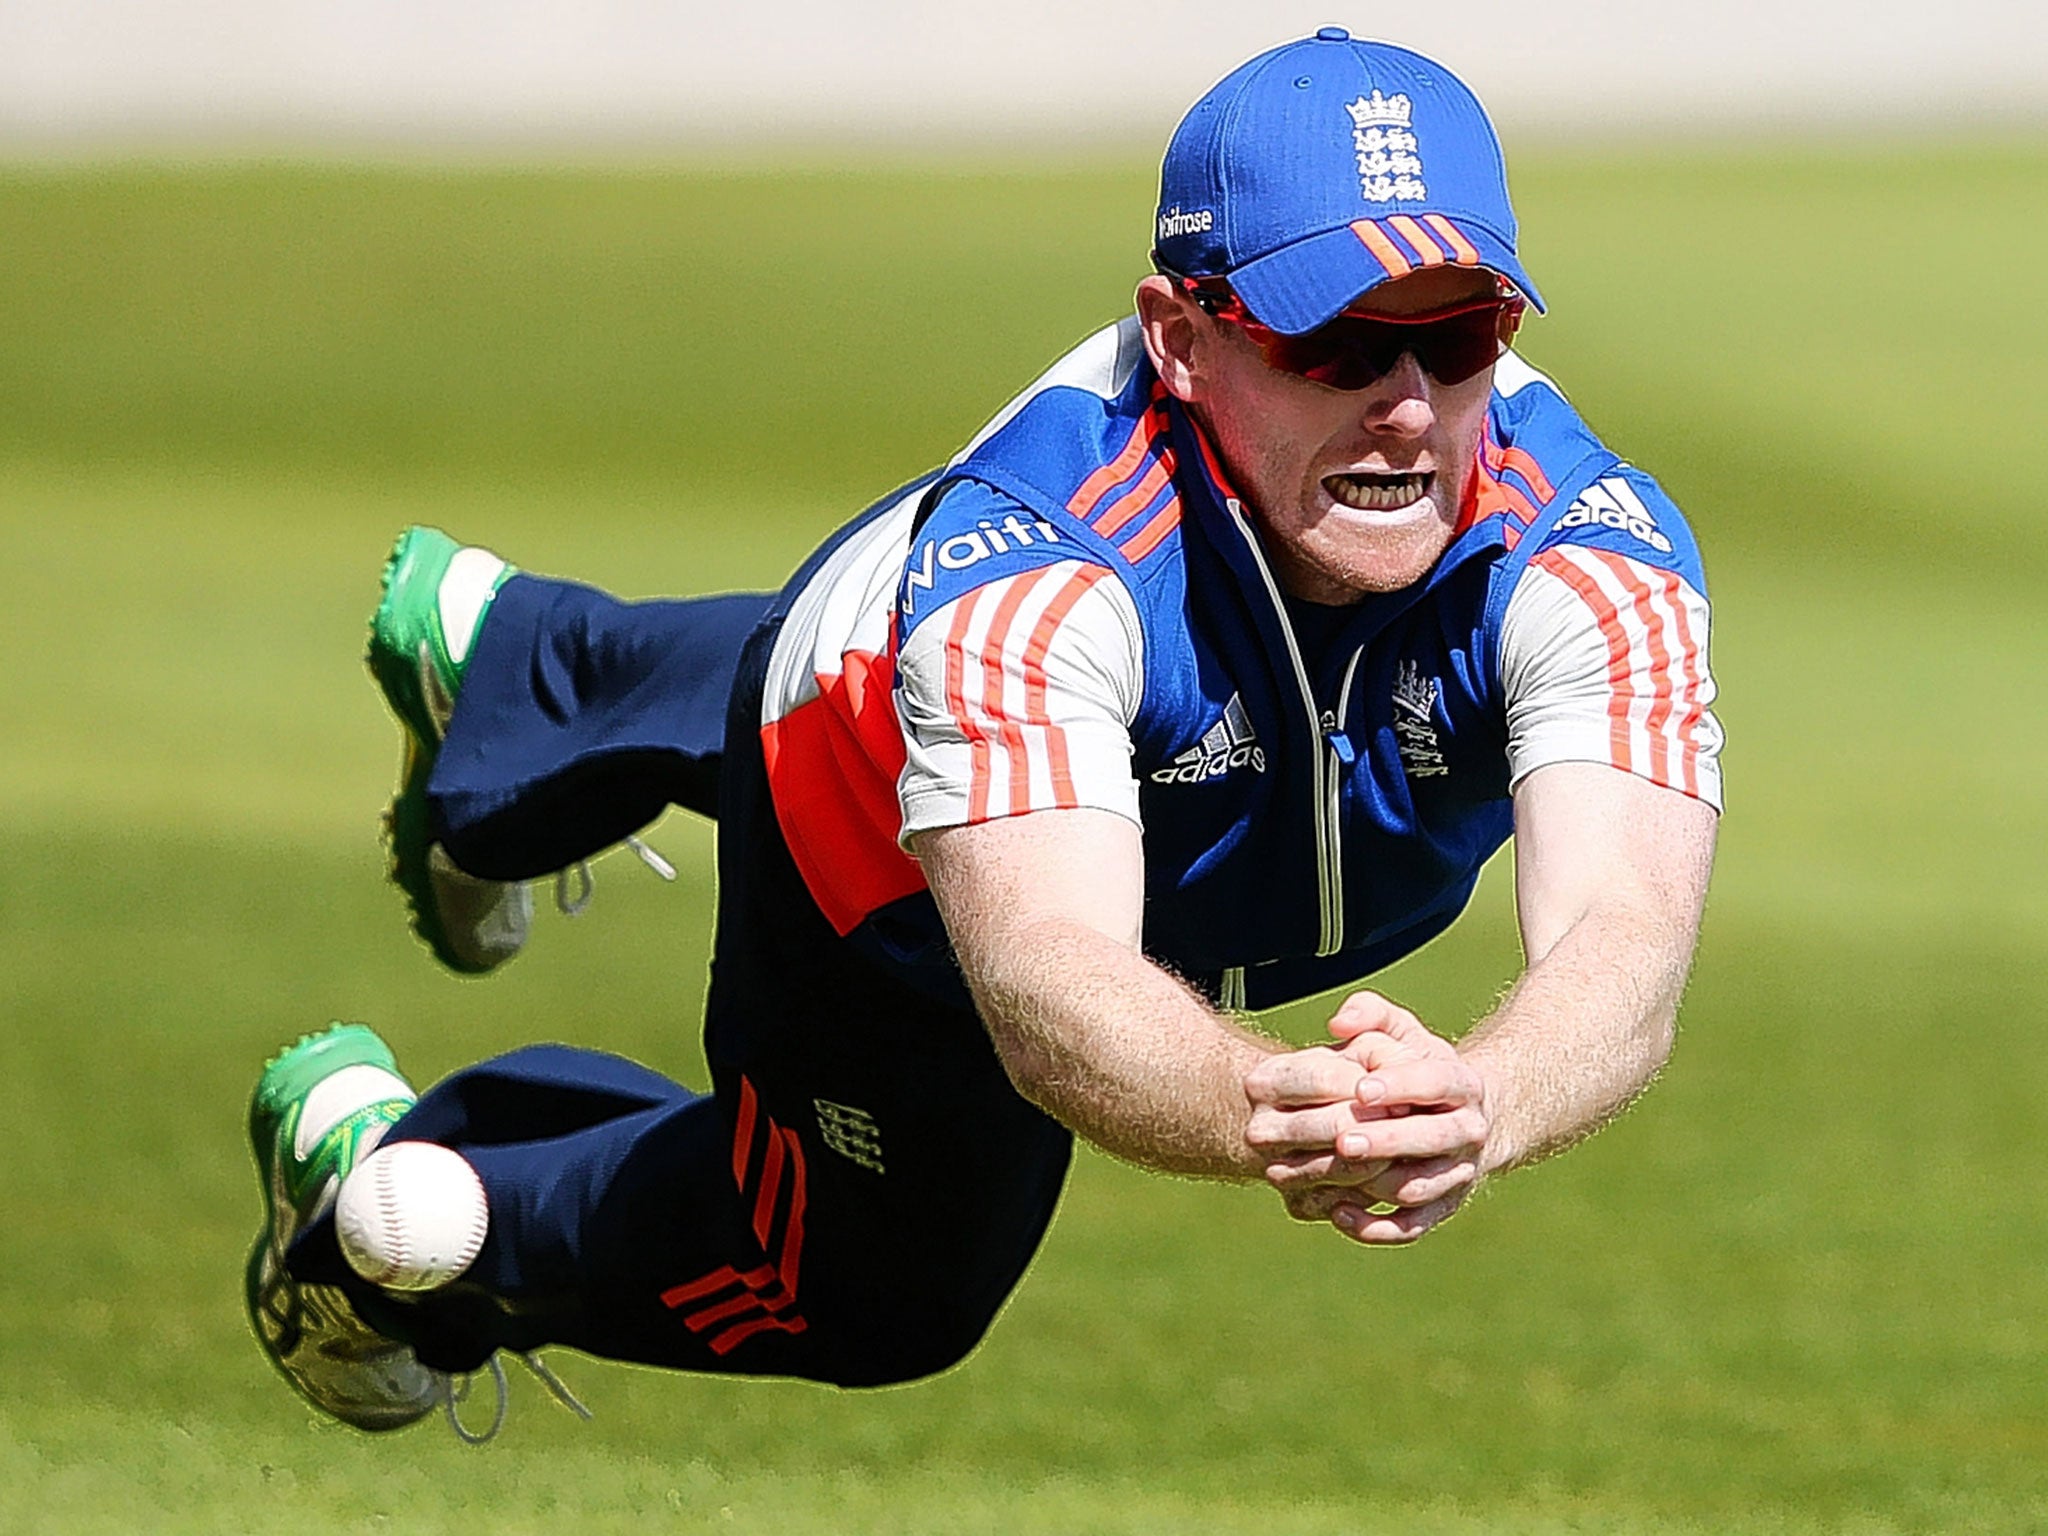 England one-day captain Eoin Morgan fails to catch the ball during yesterday’s fielding practice at Edgbaston